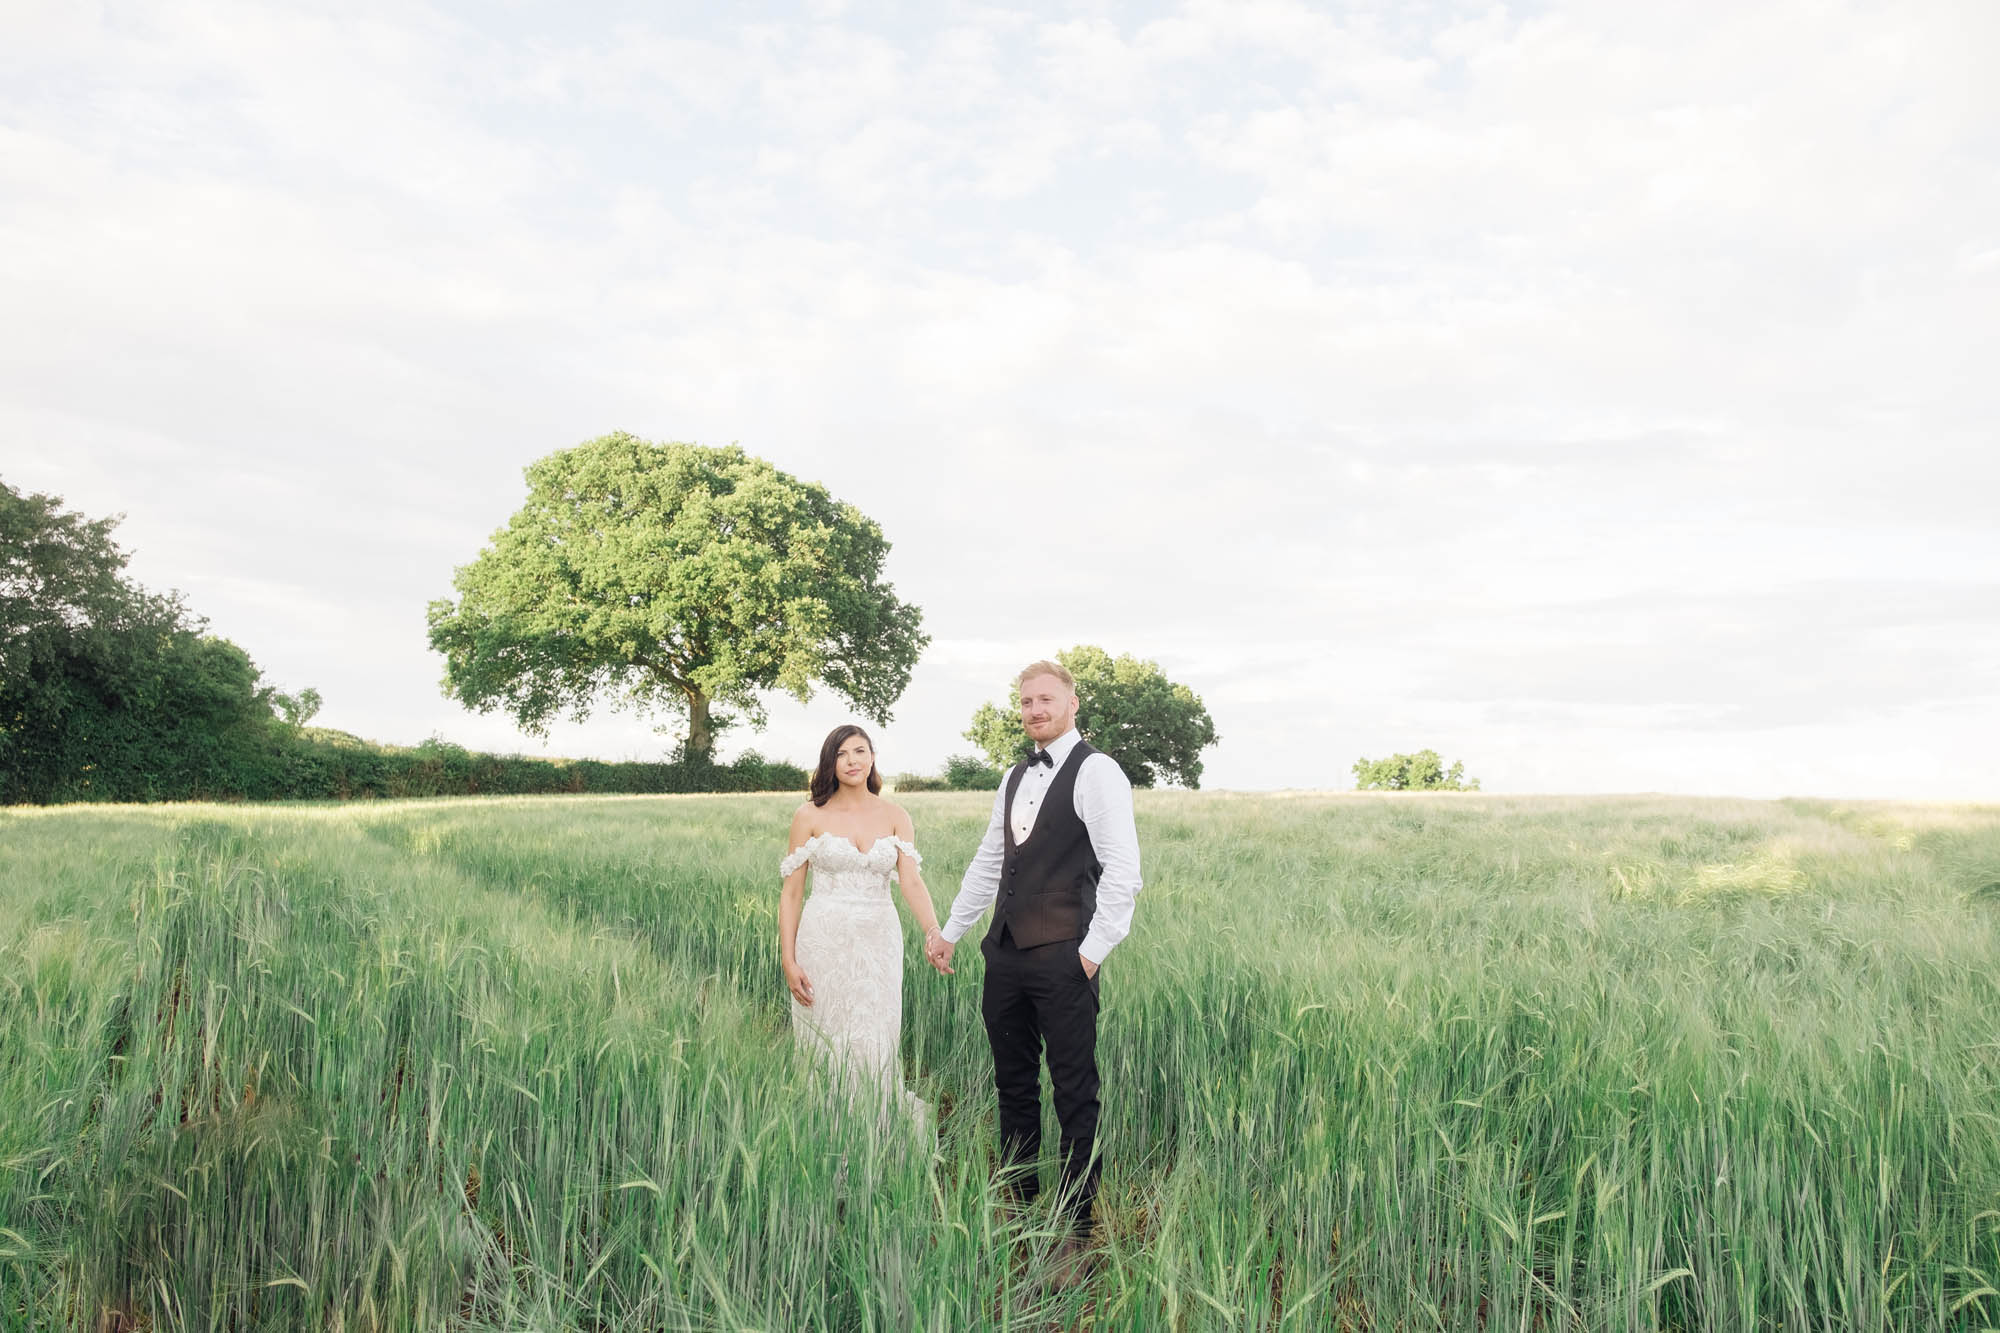 Wide angle wedding photo of a bride and groom in a green cornfield with trees behind them. By Jordan Fox Photography